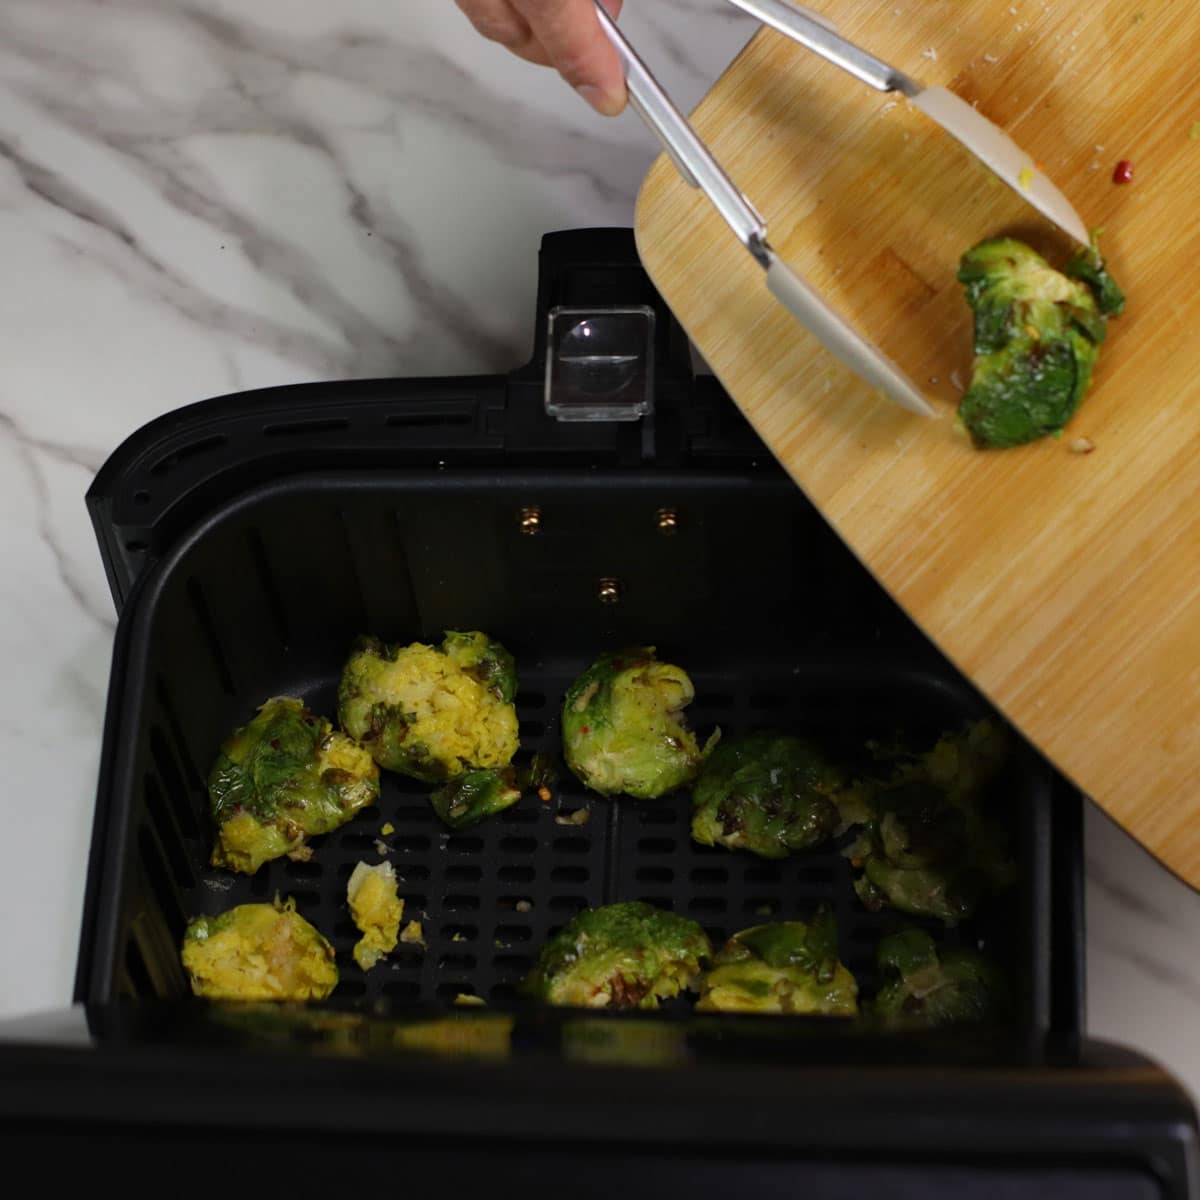 Cooking smashed Brussels sprouts in air fryer